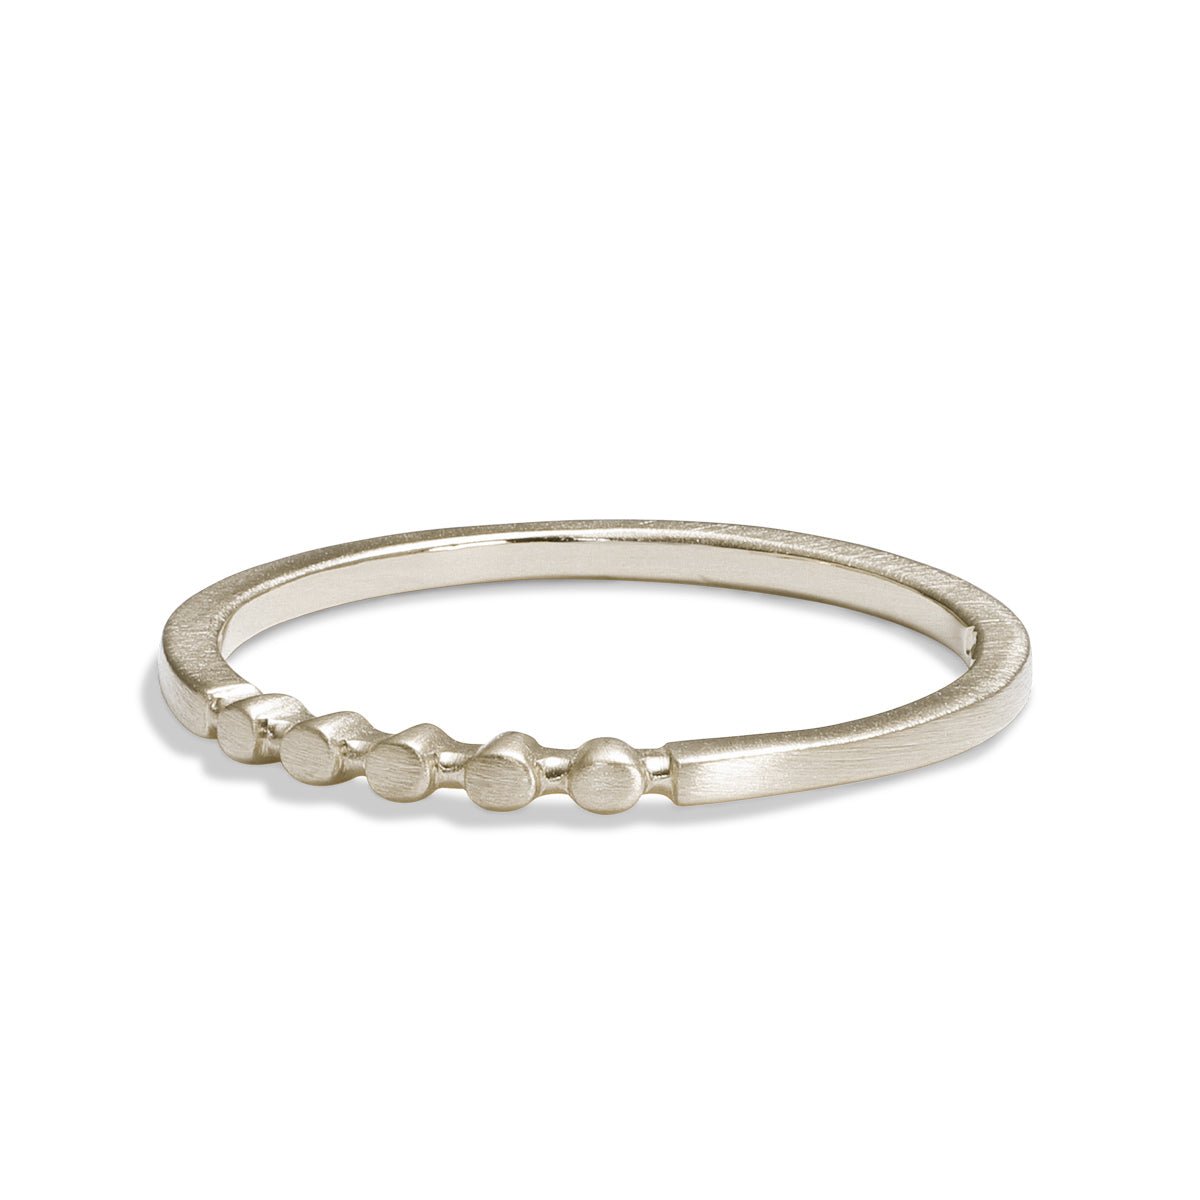 Circle motif Itero ring in 14K recycled white gold. Designed and crafted in our Portland production studio.